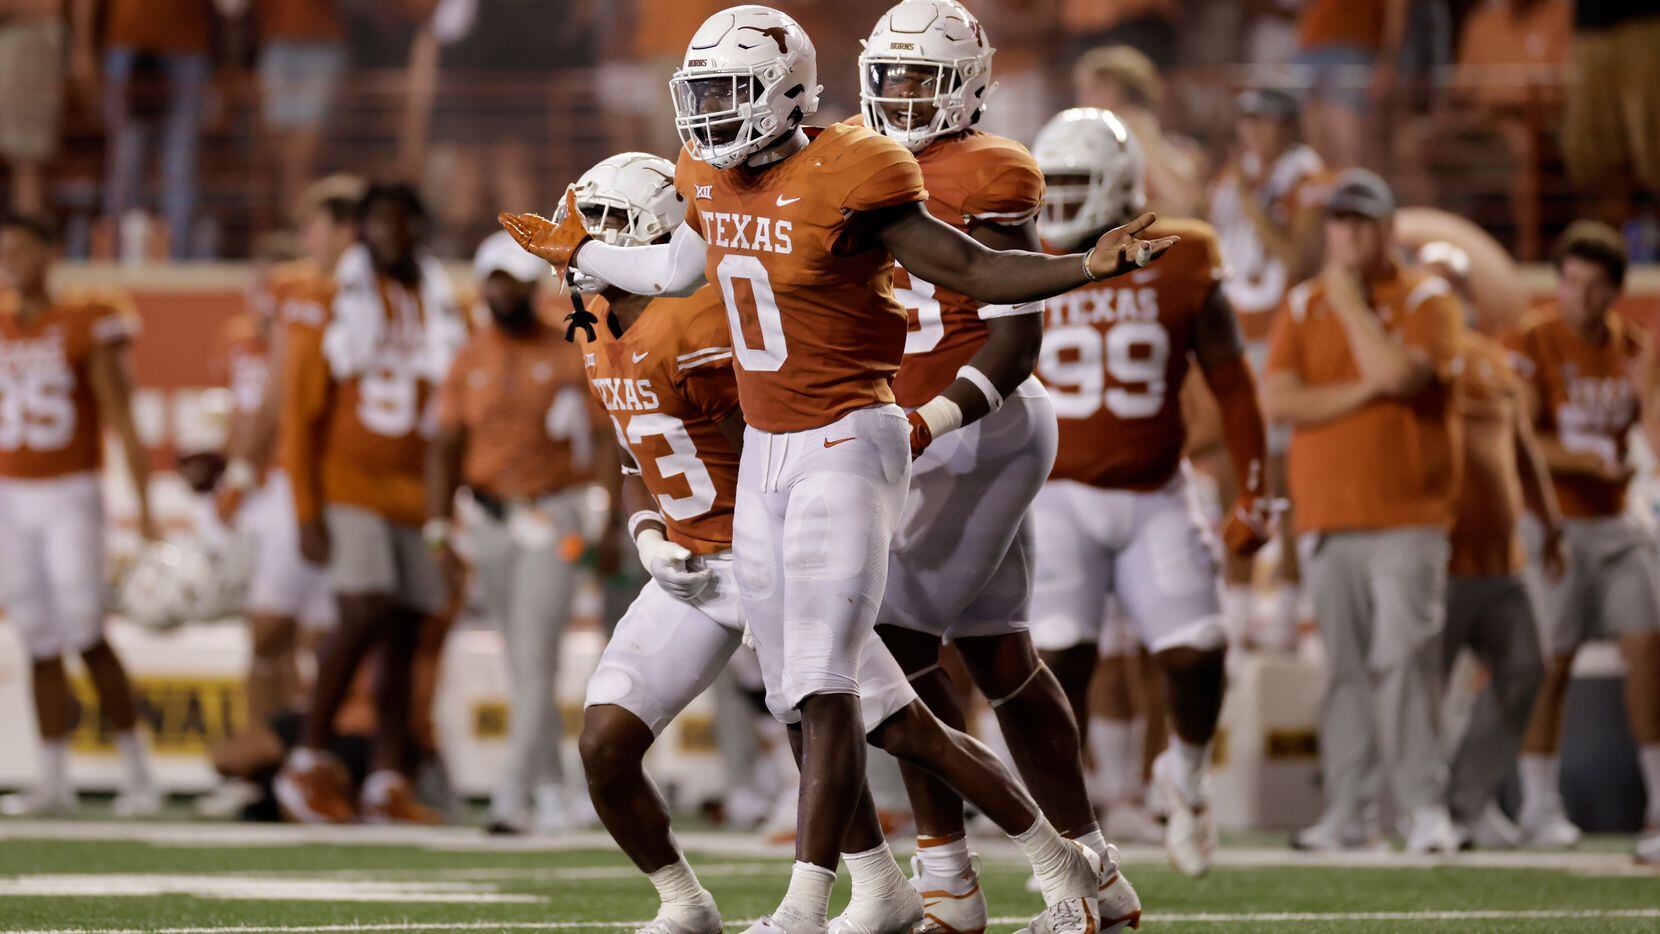 Learfield represents the athletics multimedia rights for the Longhorns and other teams...